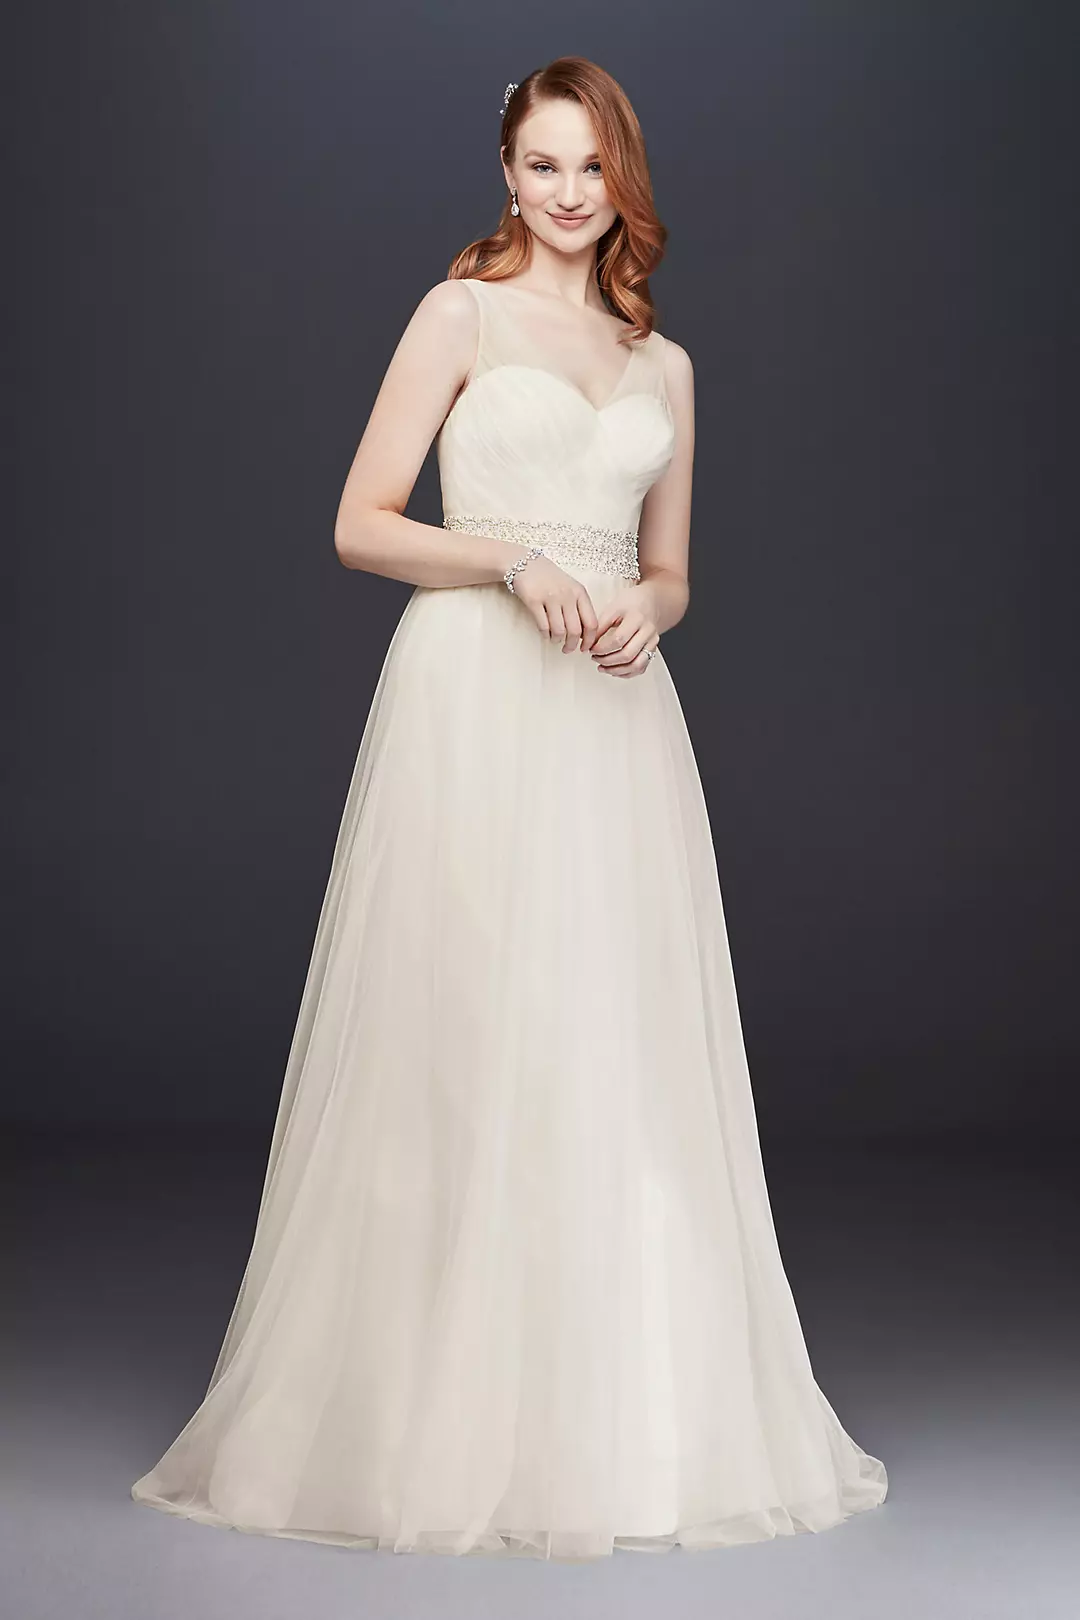 Tulle A-Line Wedding Dress with Beaded Waist Image